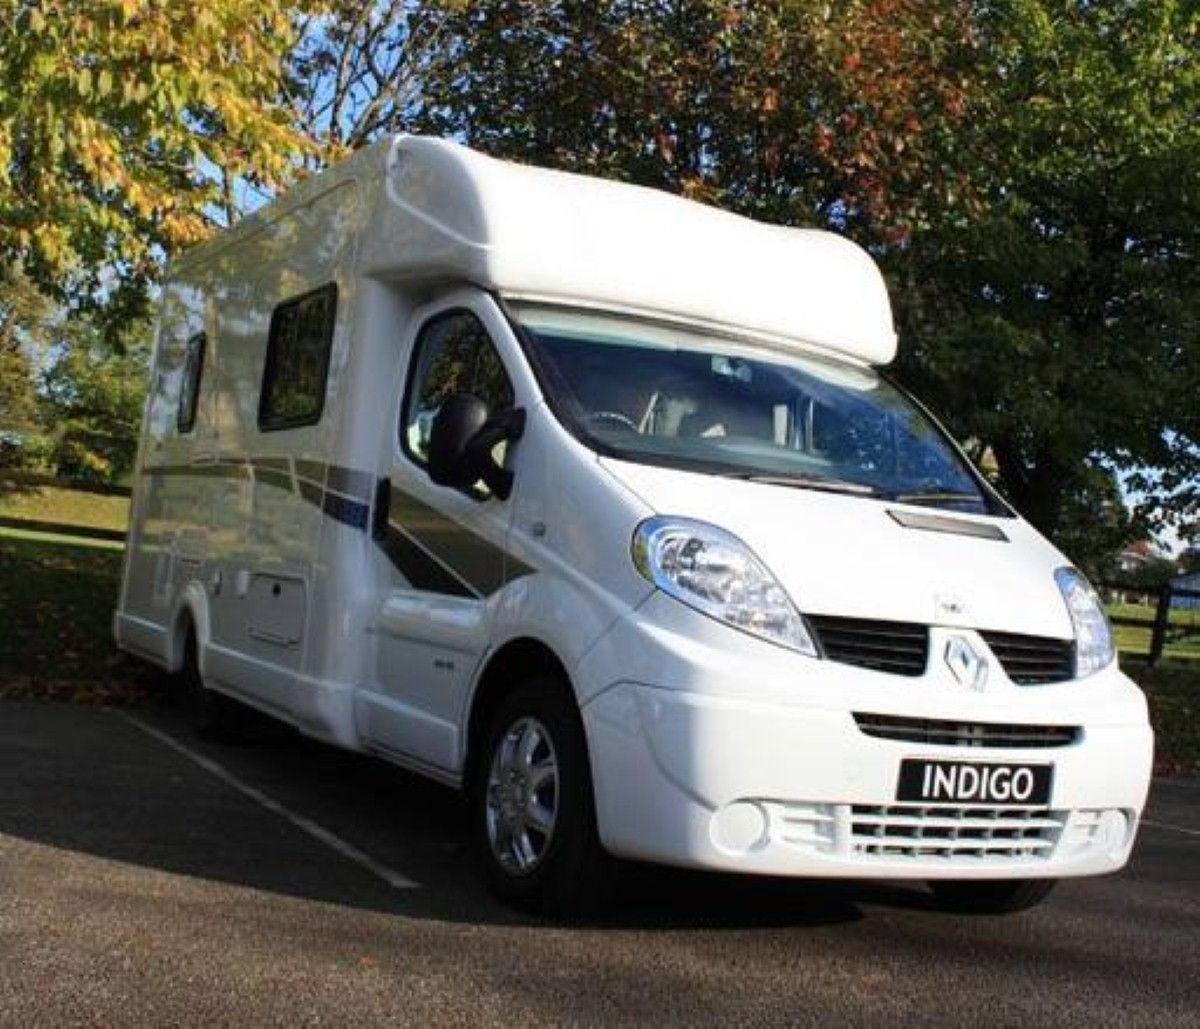 The Motorhome Summer Fair promises to be a great weekend for motorhomers and caravanners alike.